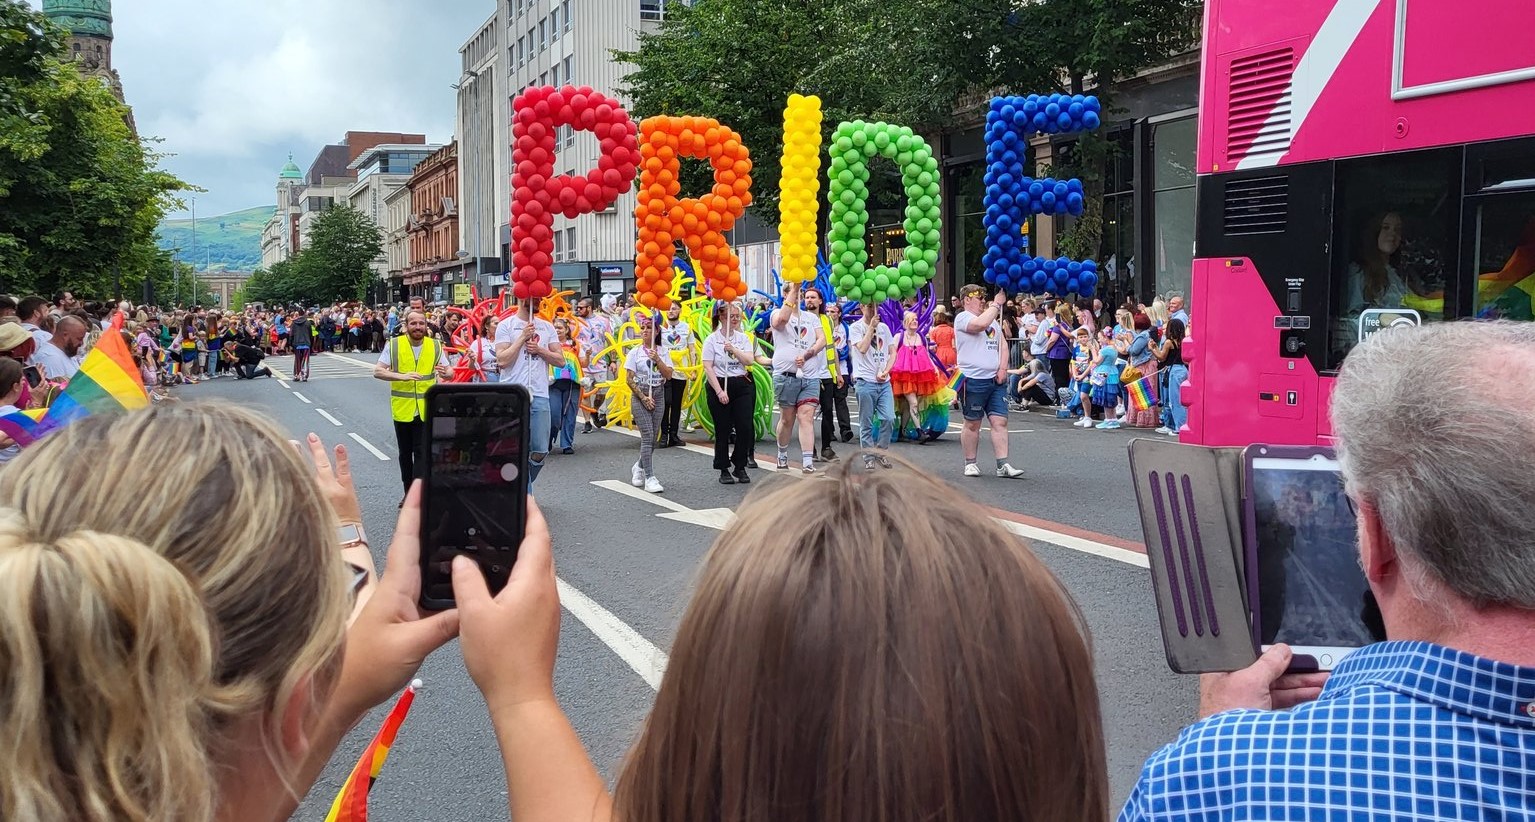 Pride members ‘overwhelmed’ by positive reception